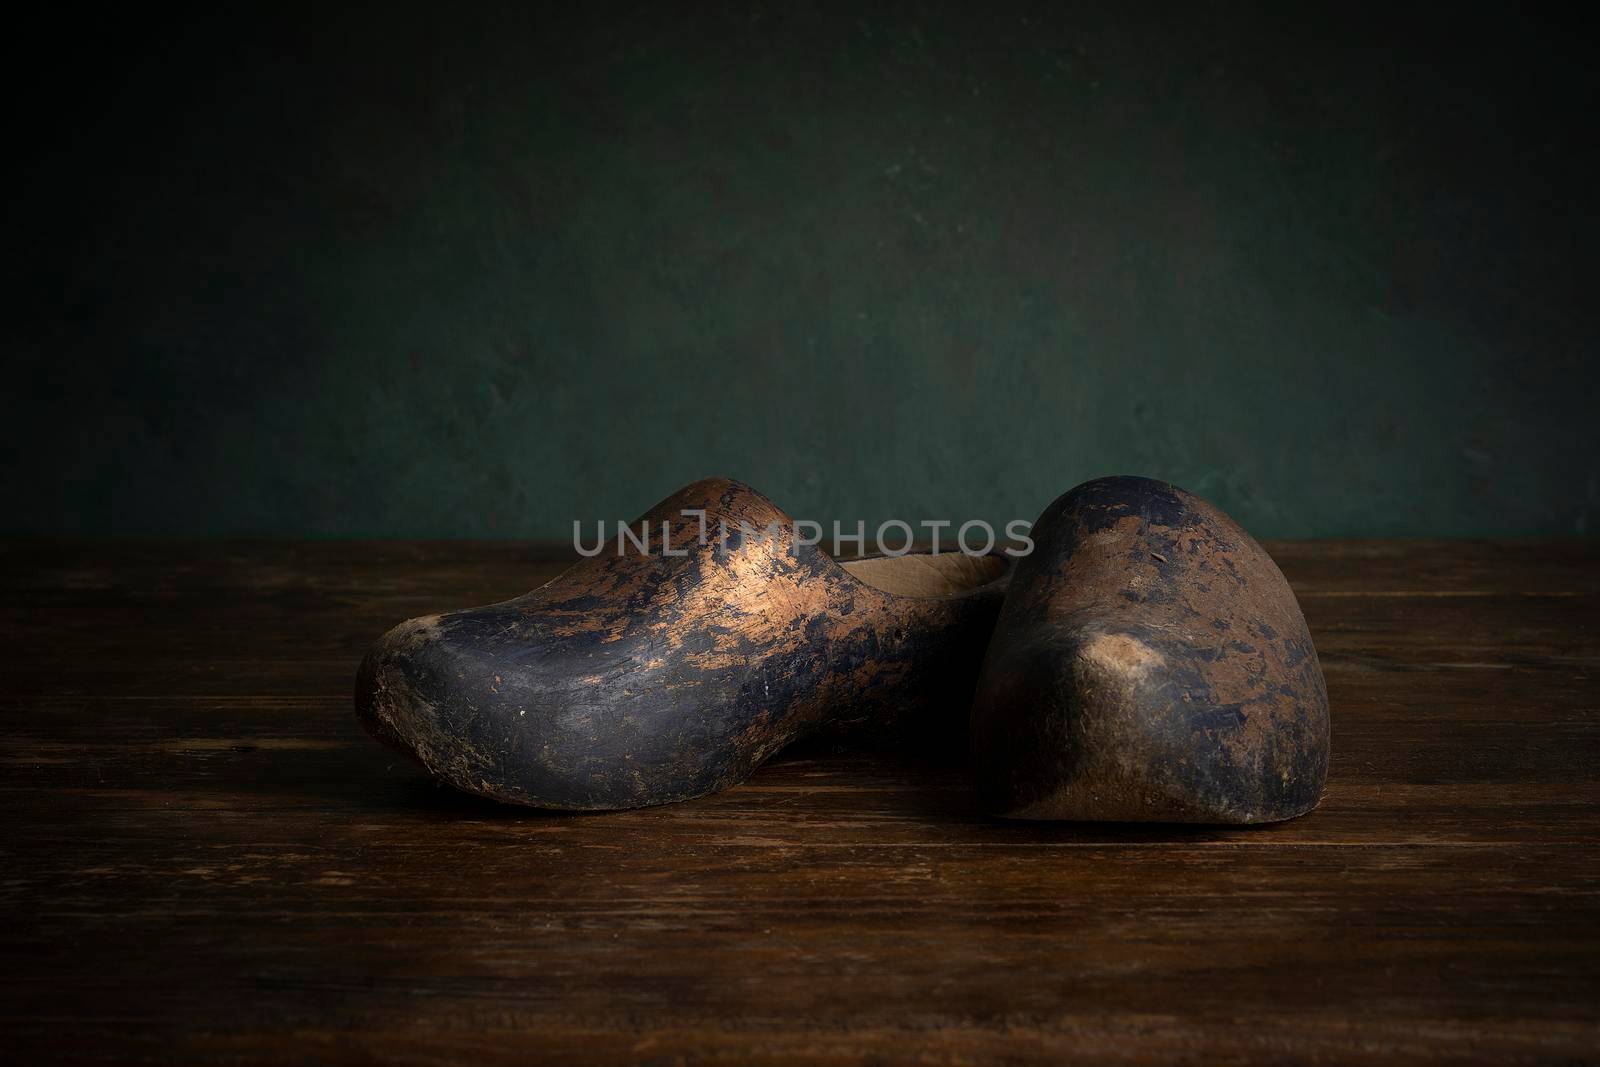 A pair of clogs or wooden shoes typical for the Dutch culture in stillife setting, Holland or The Netherlands